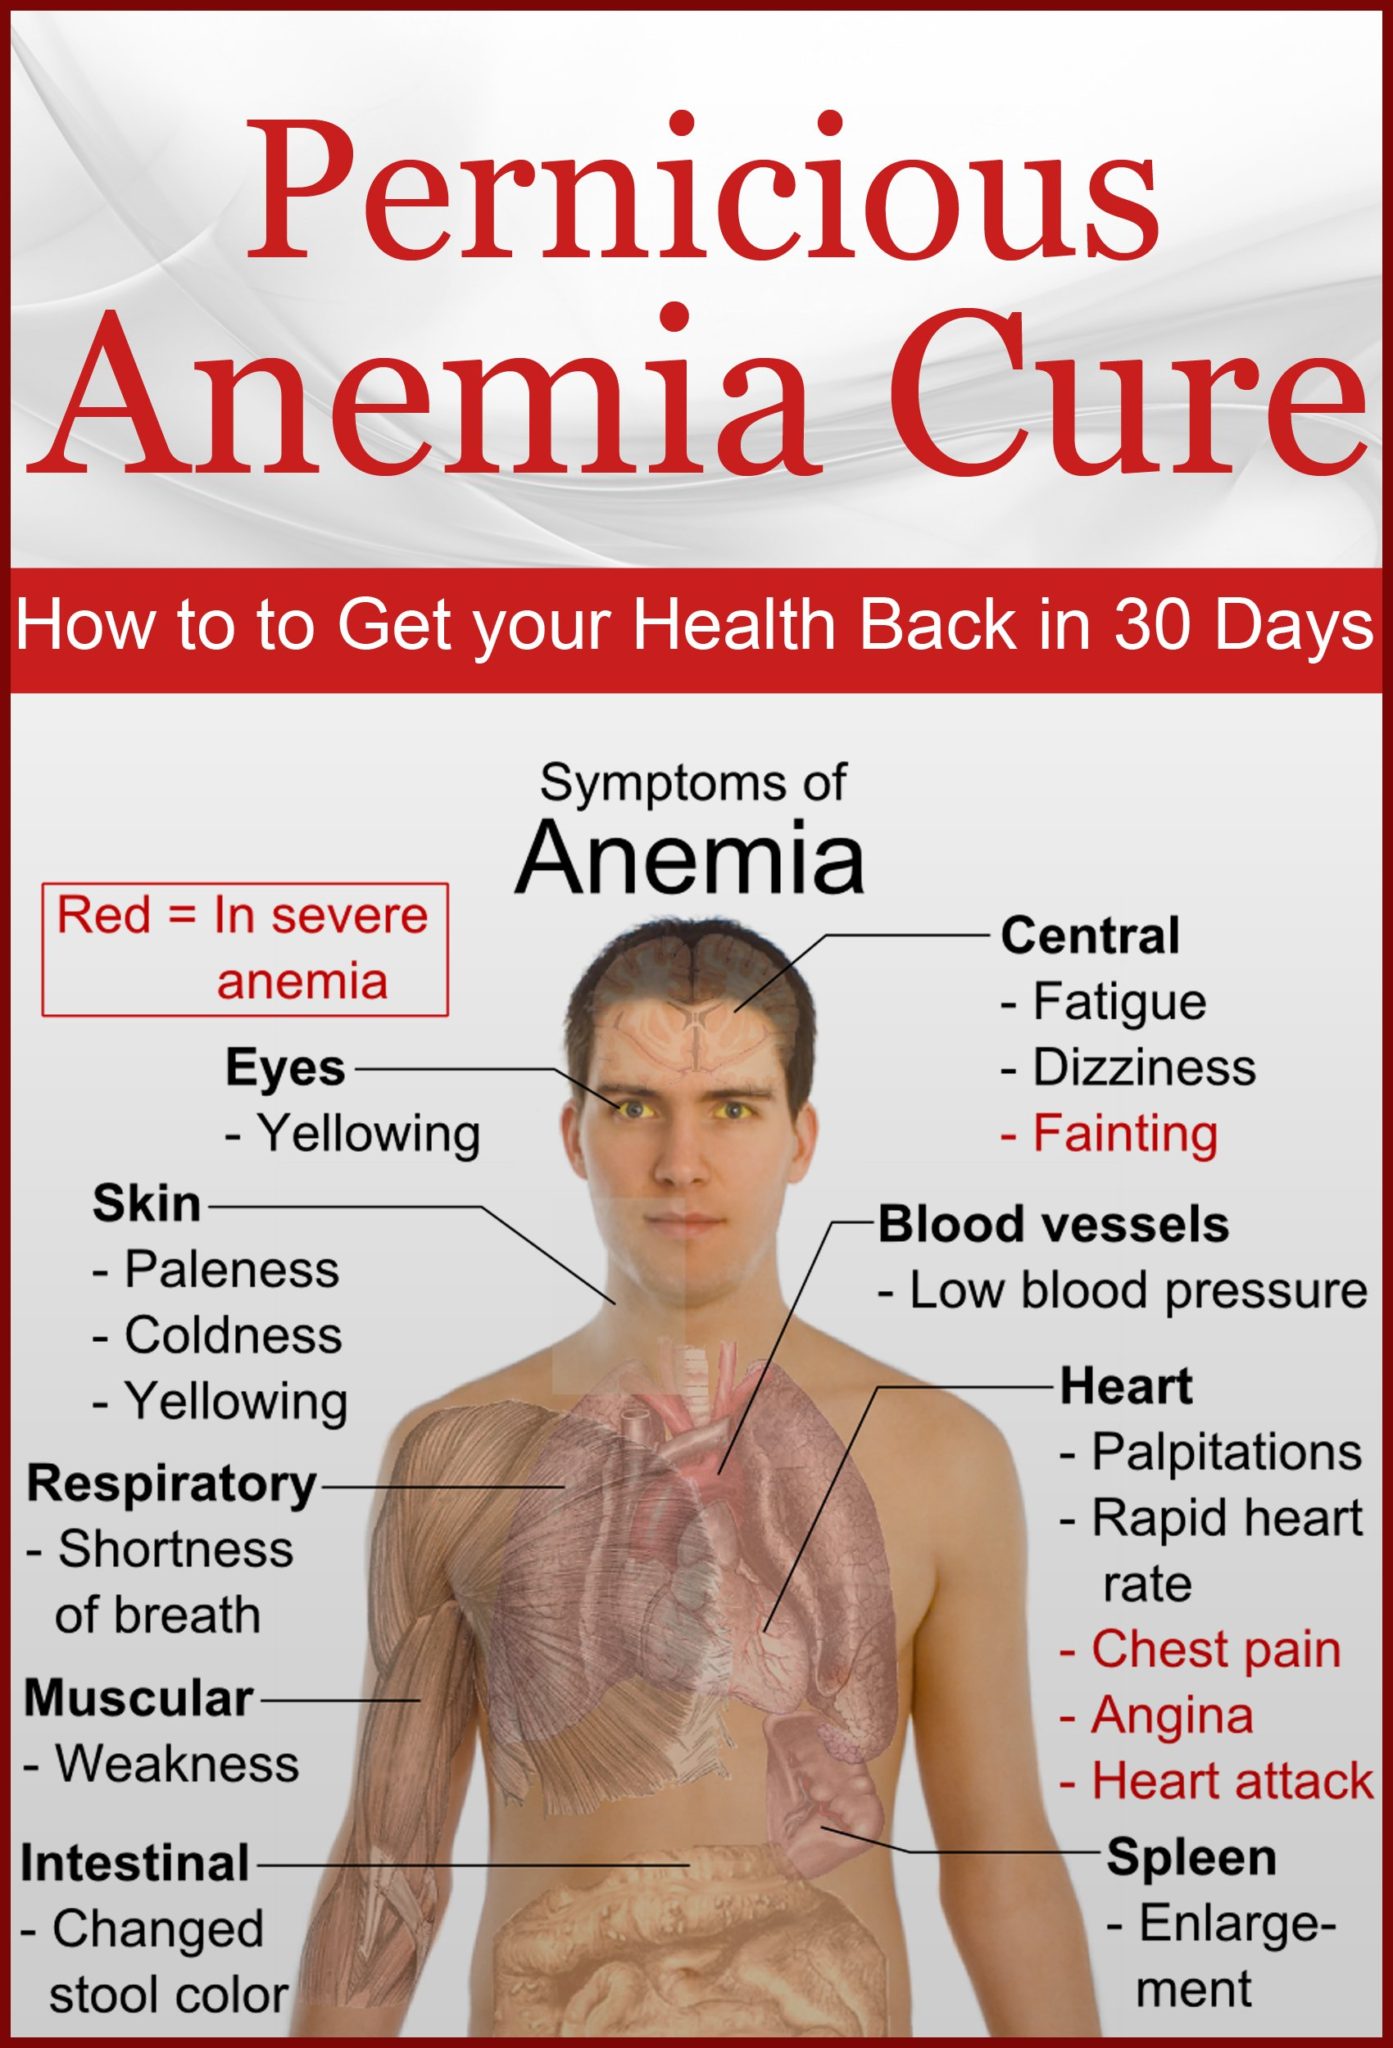 FREE: Pernicious Anemia Cure: How to Get Your Health Back in 30 Days (anemia,anemia symptoms,immune system,iron deficiency anemia,what is anemia) by Mary Bux